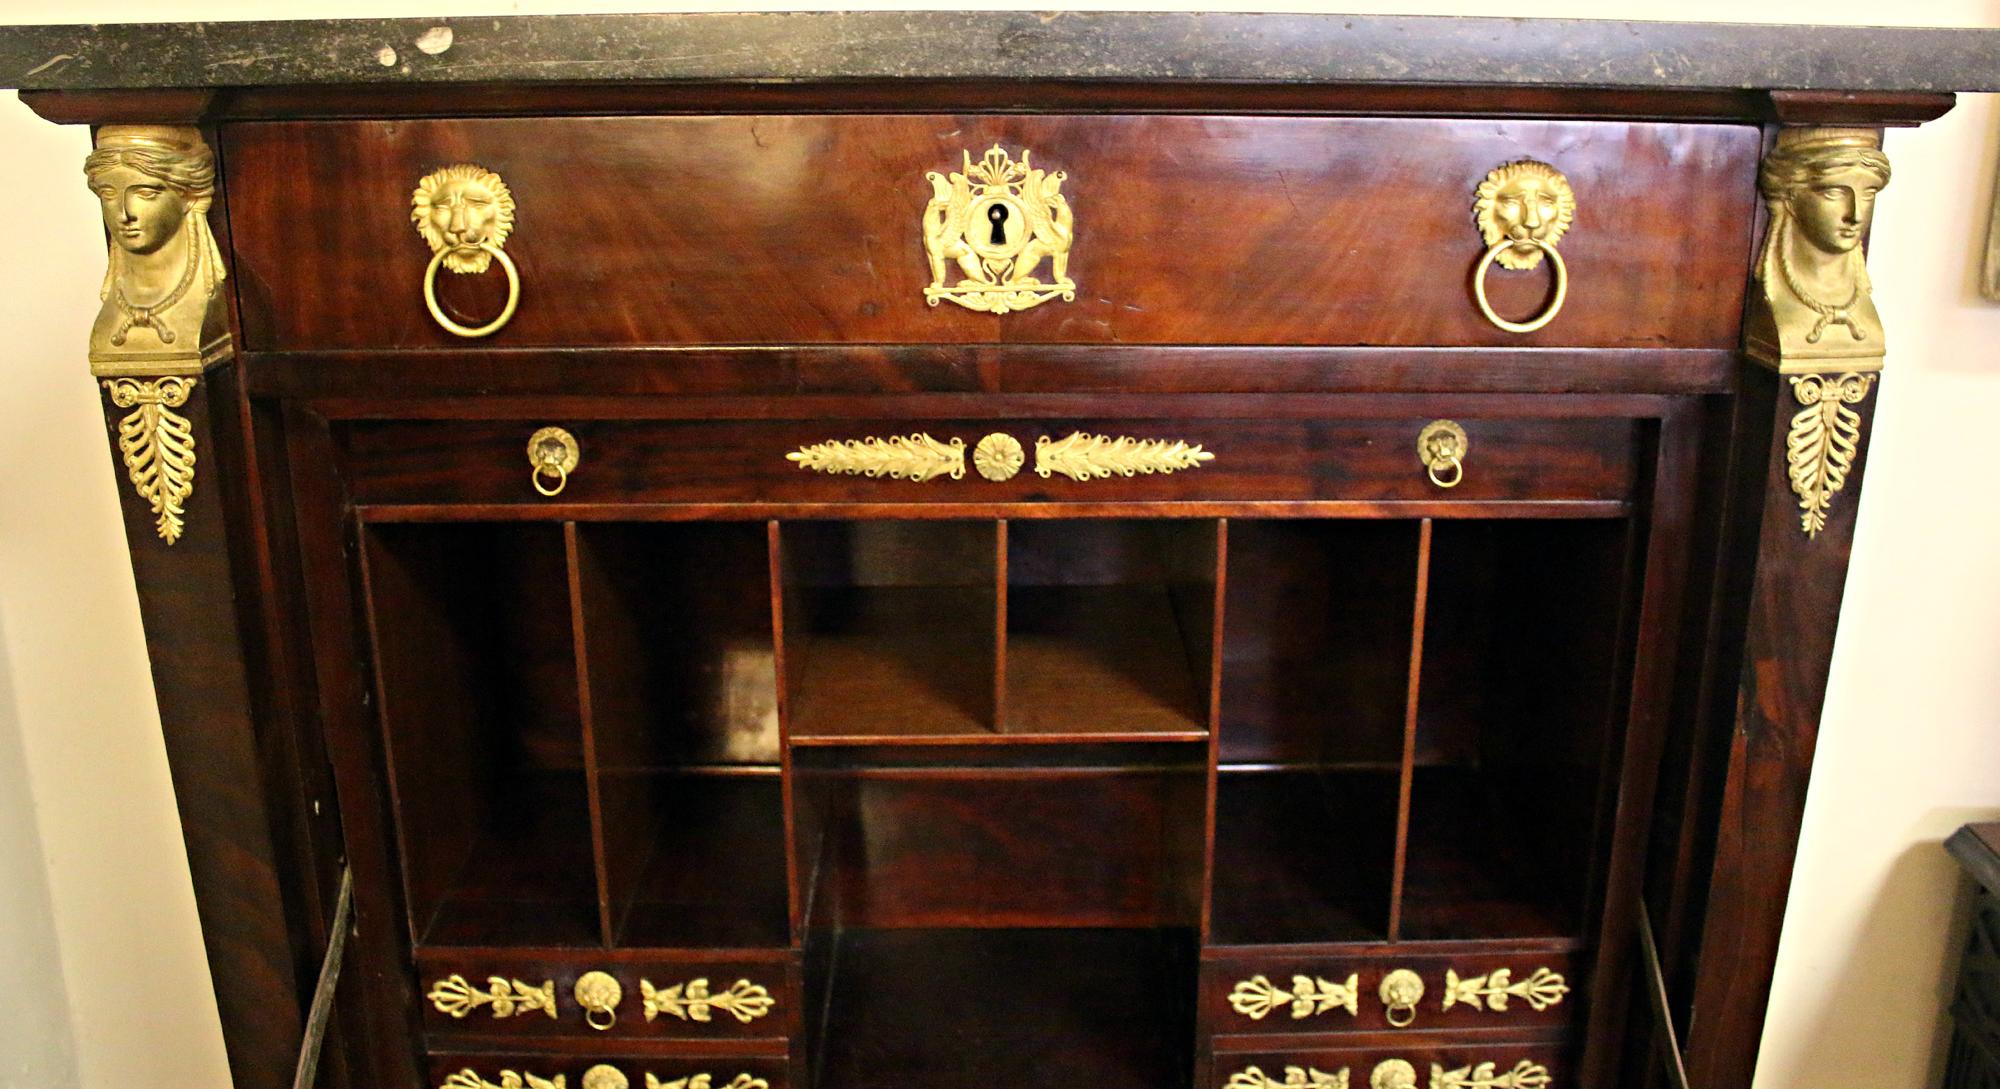 French 19th C. Second Empire Secrétaire À Abattant with Gold Ormolu Mounts For Sale 5